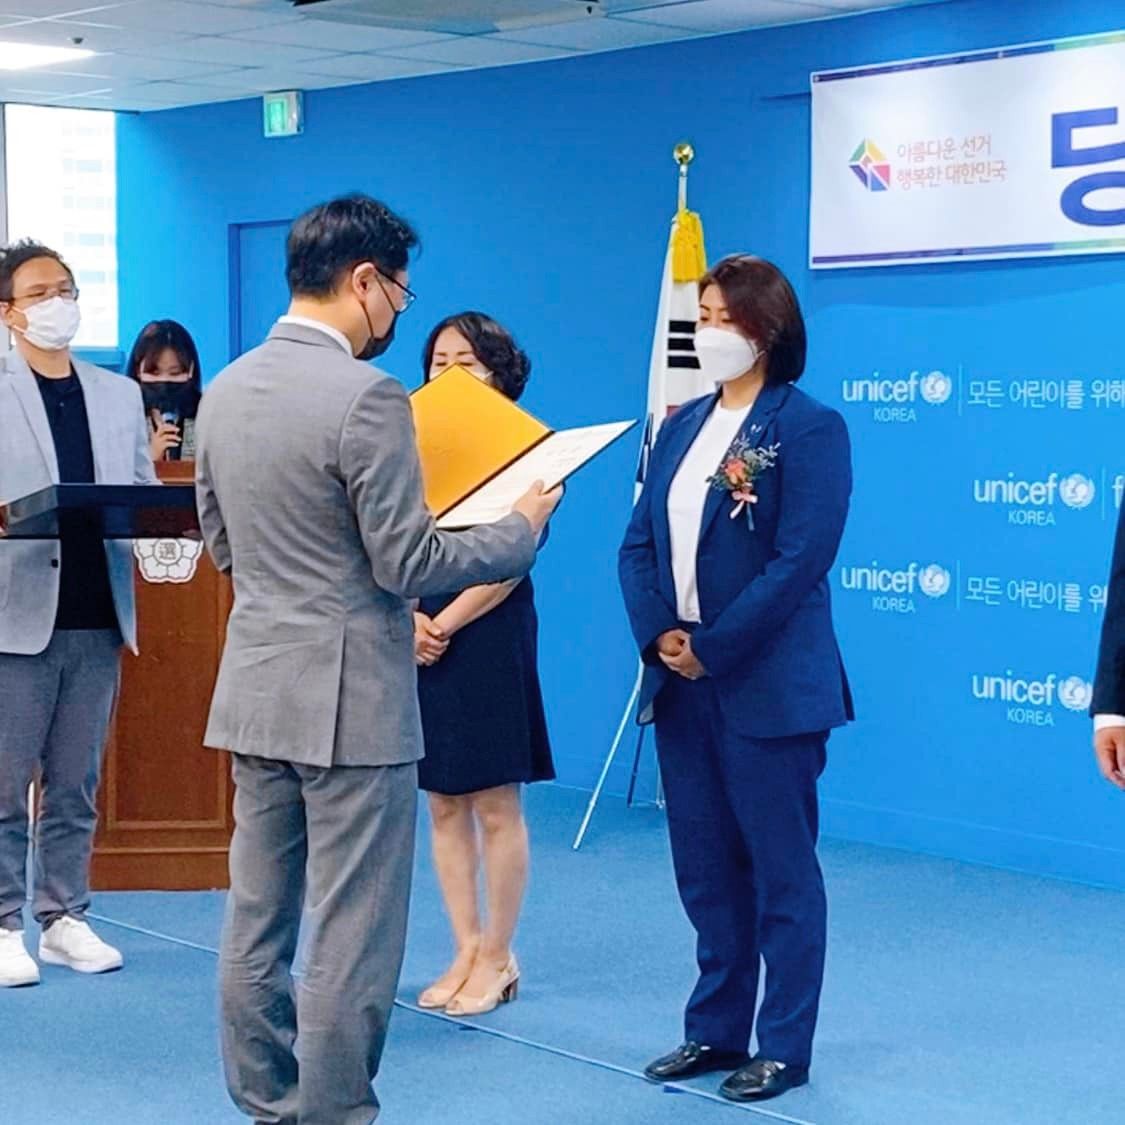 South Korea's First Gay Elected Official